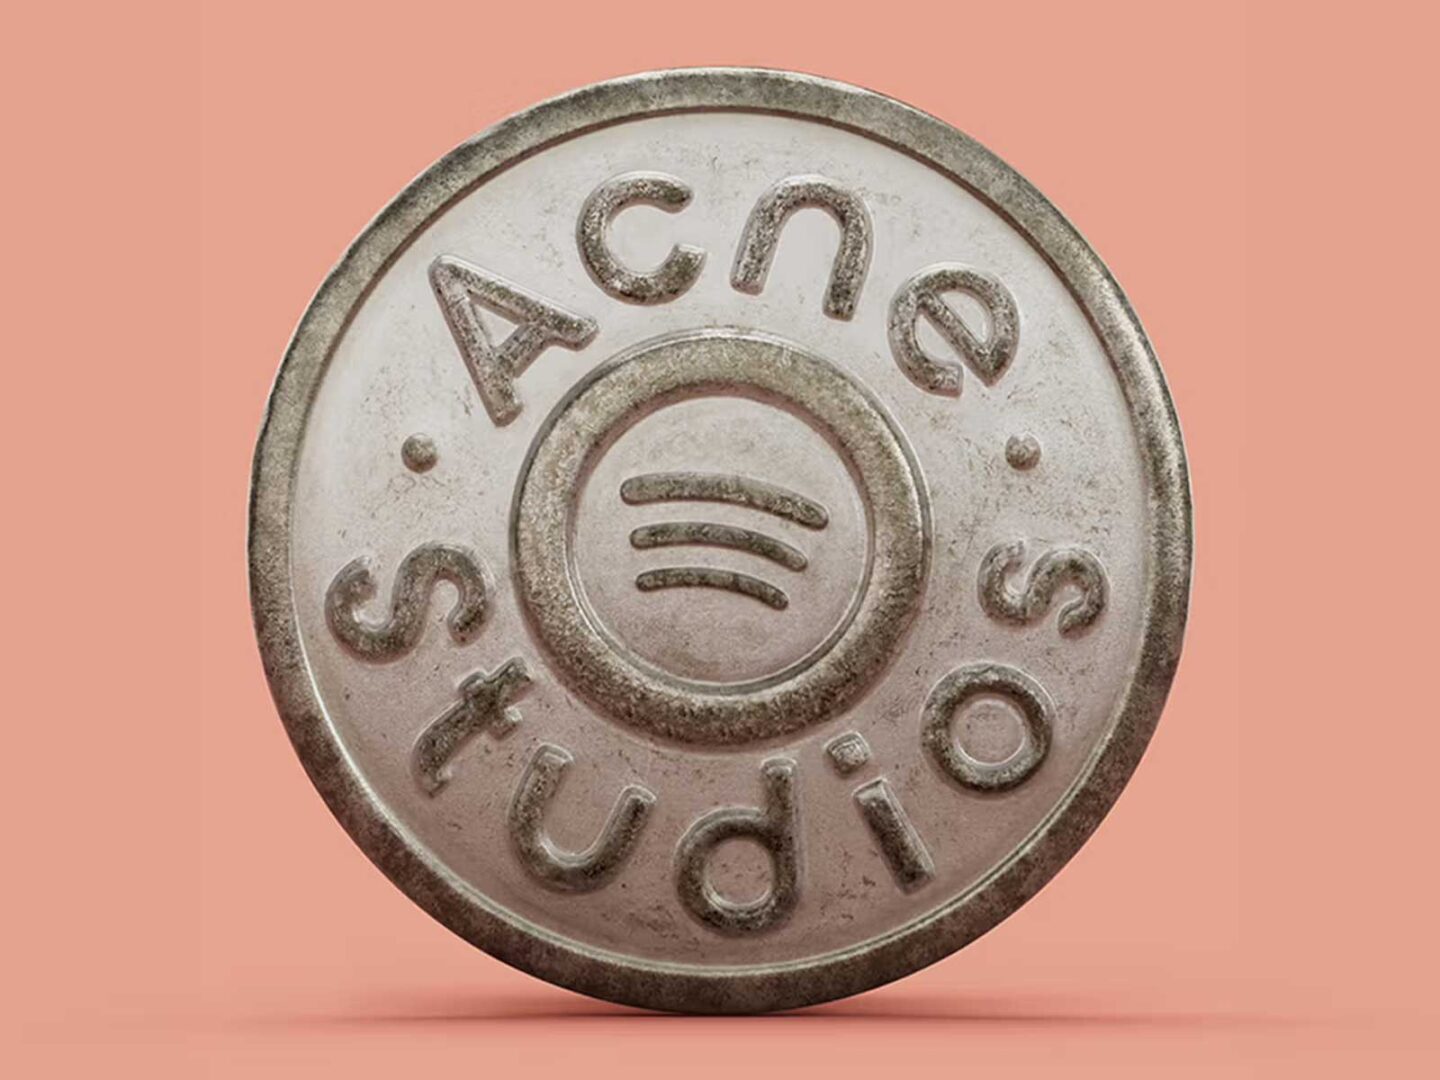 Spotify x Acne Studios: a partnership that fuses music and fashion